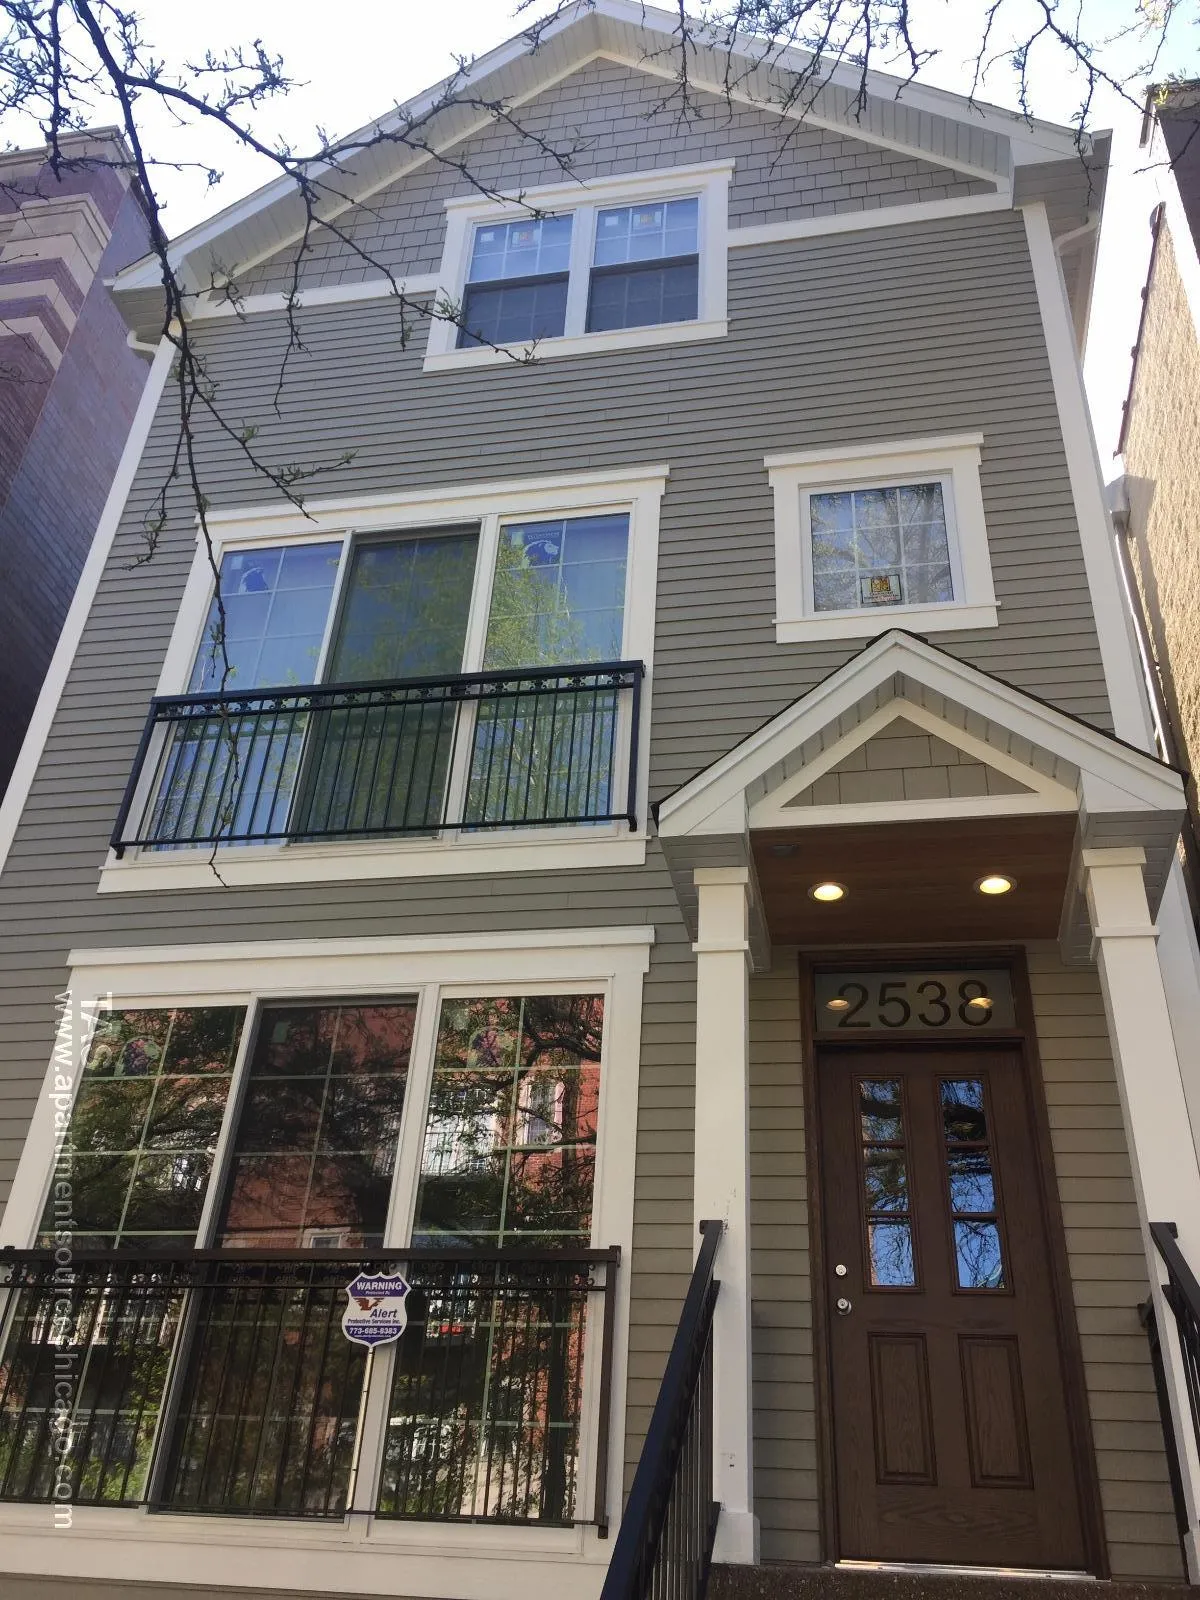 2538 N SOUTHPORT AVE 60614-unit#1R-Chicago-IL